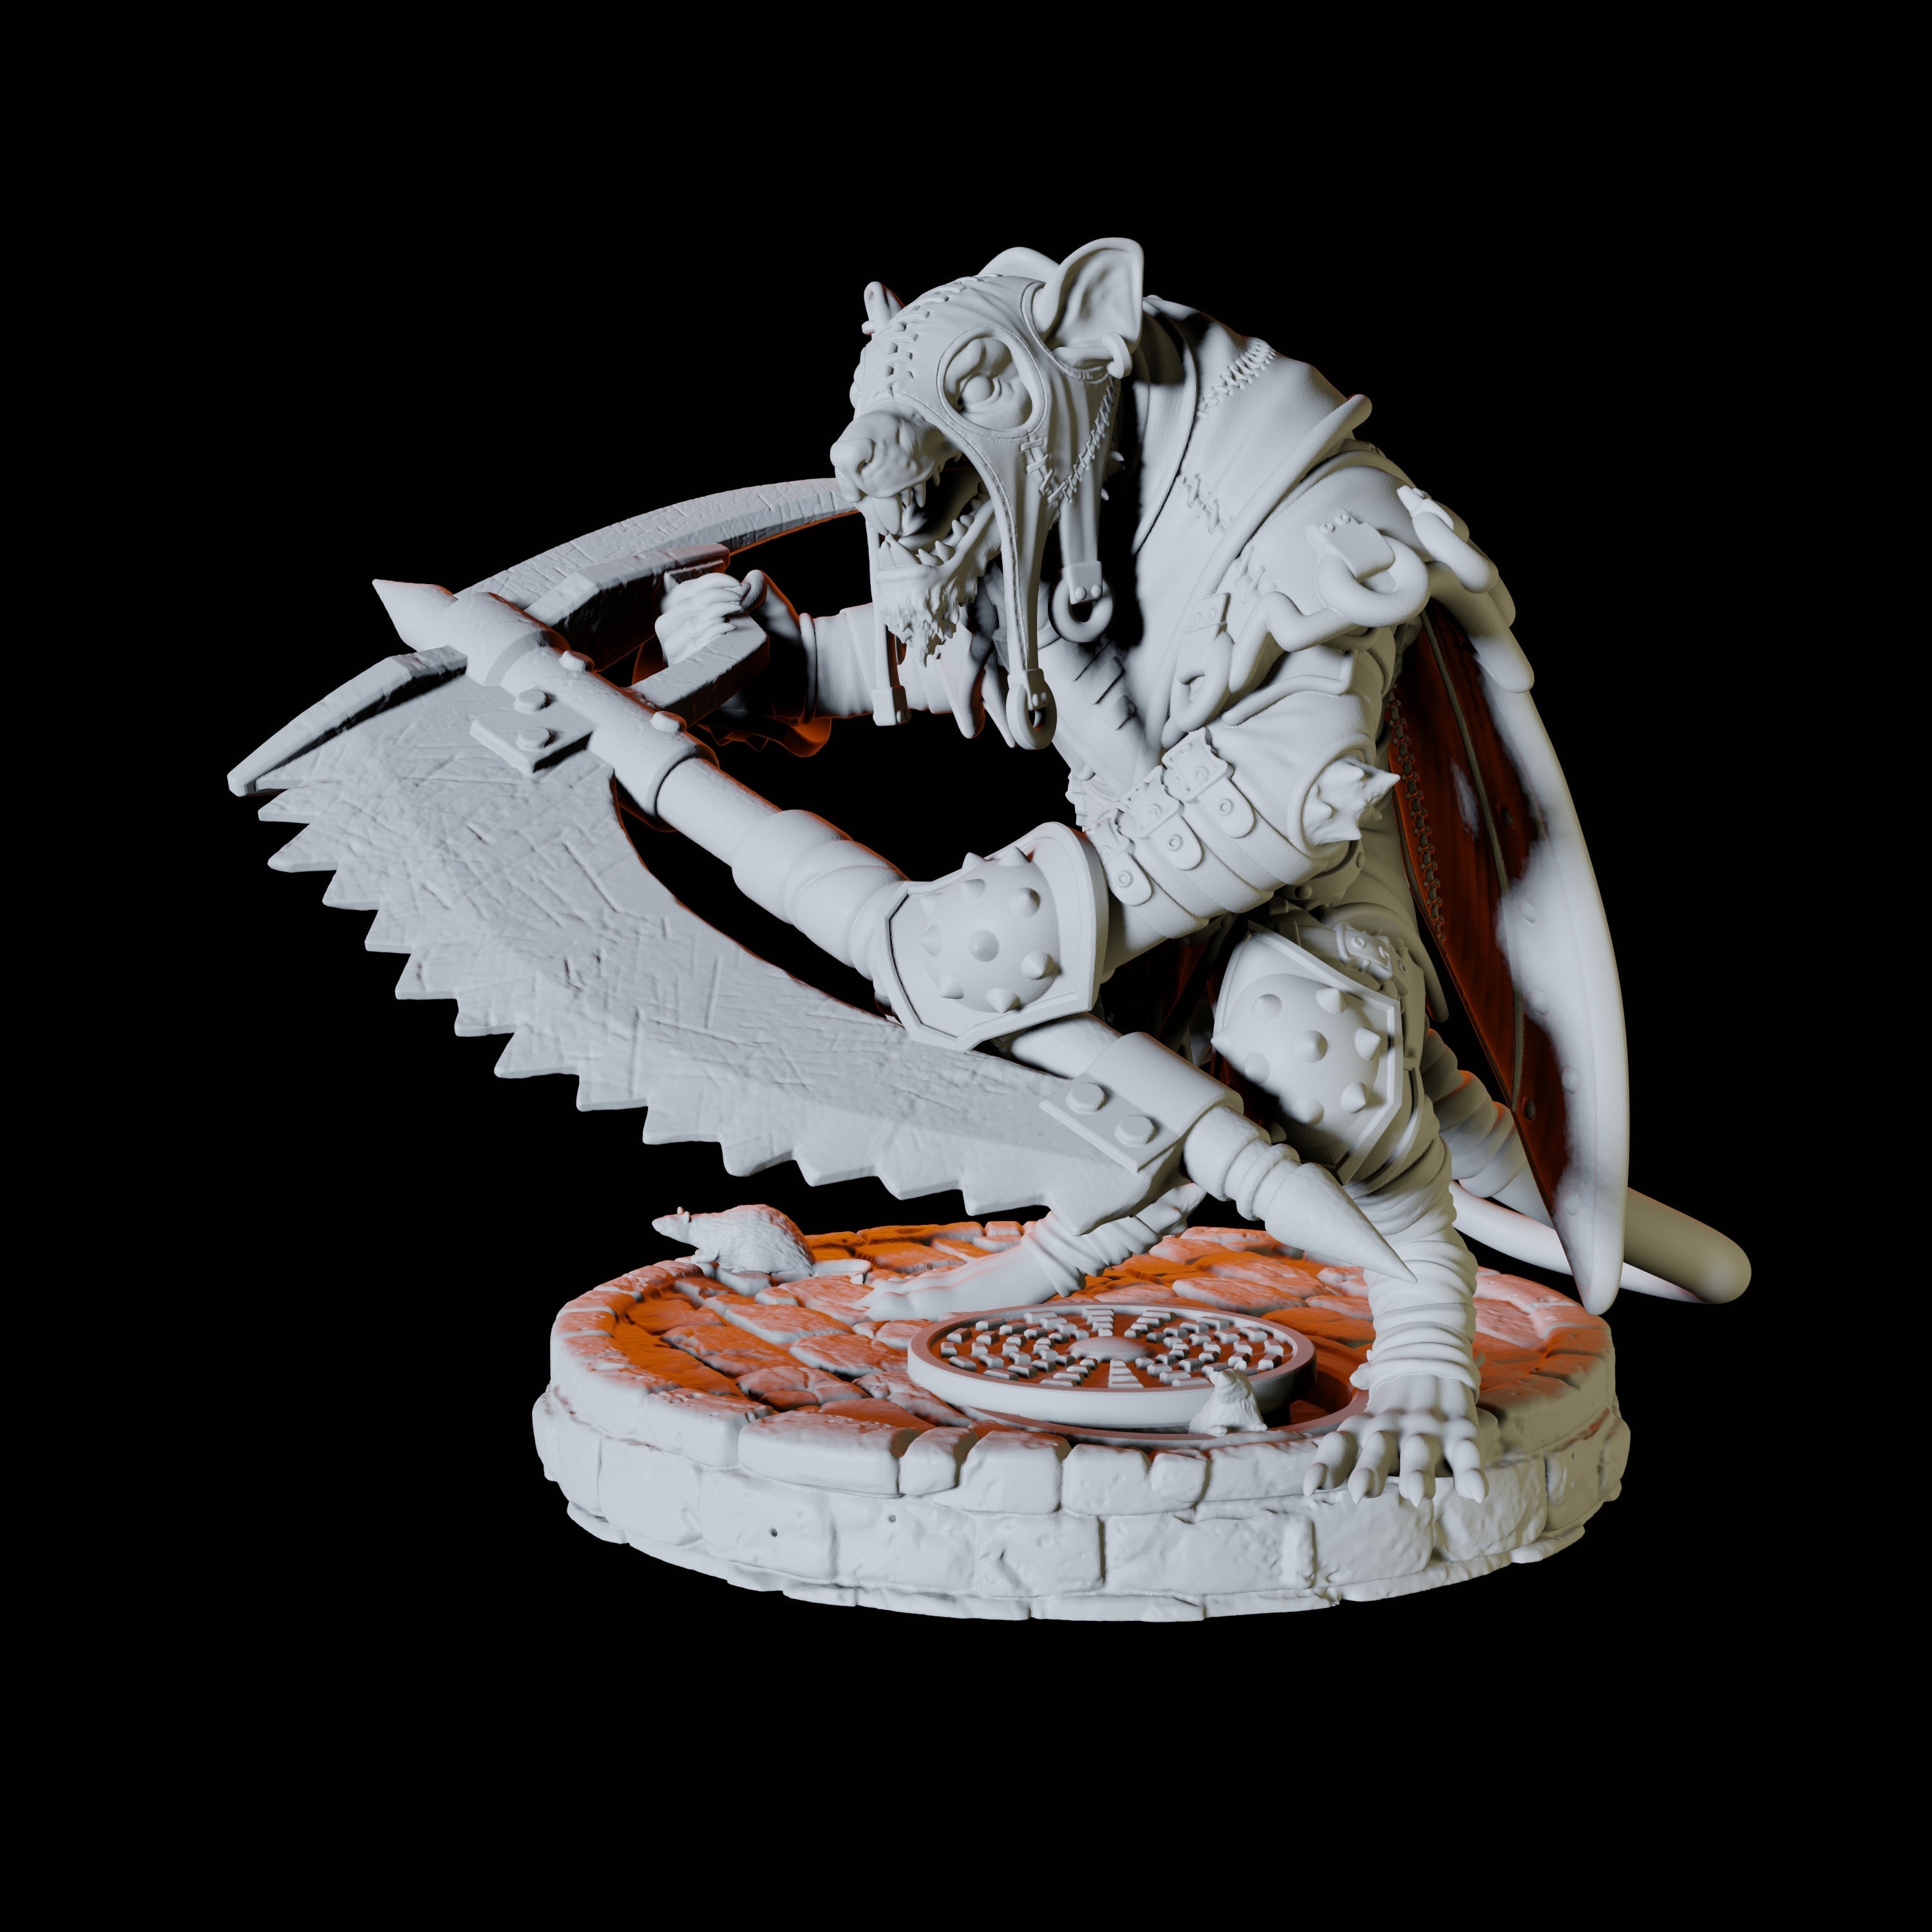 Ratfolk Assassin C Miniature for Dungeons and Dragons, Pathfinder or other TTRPGs